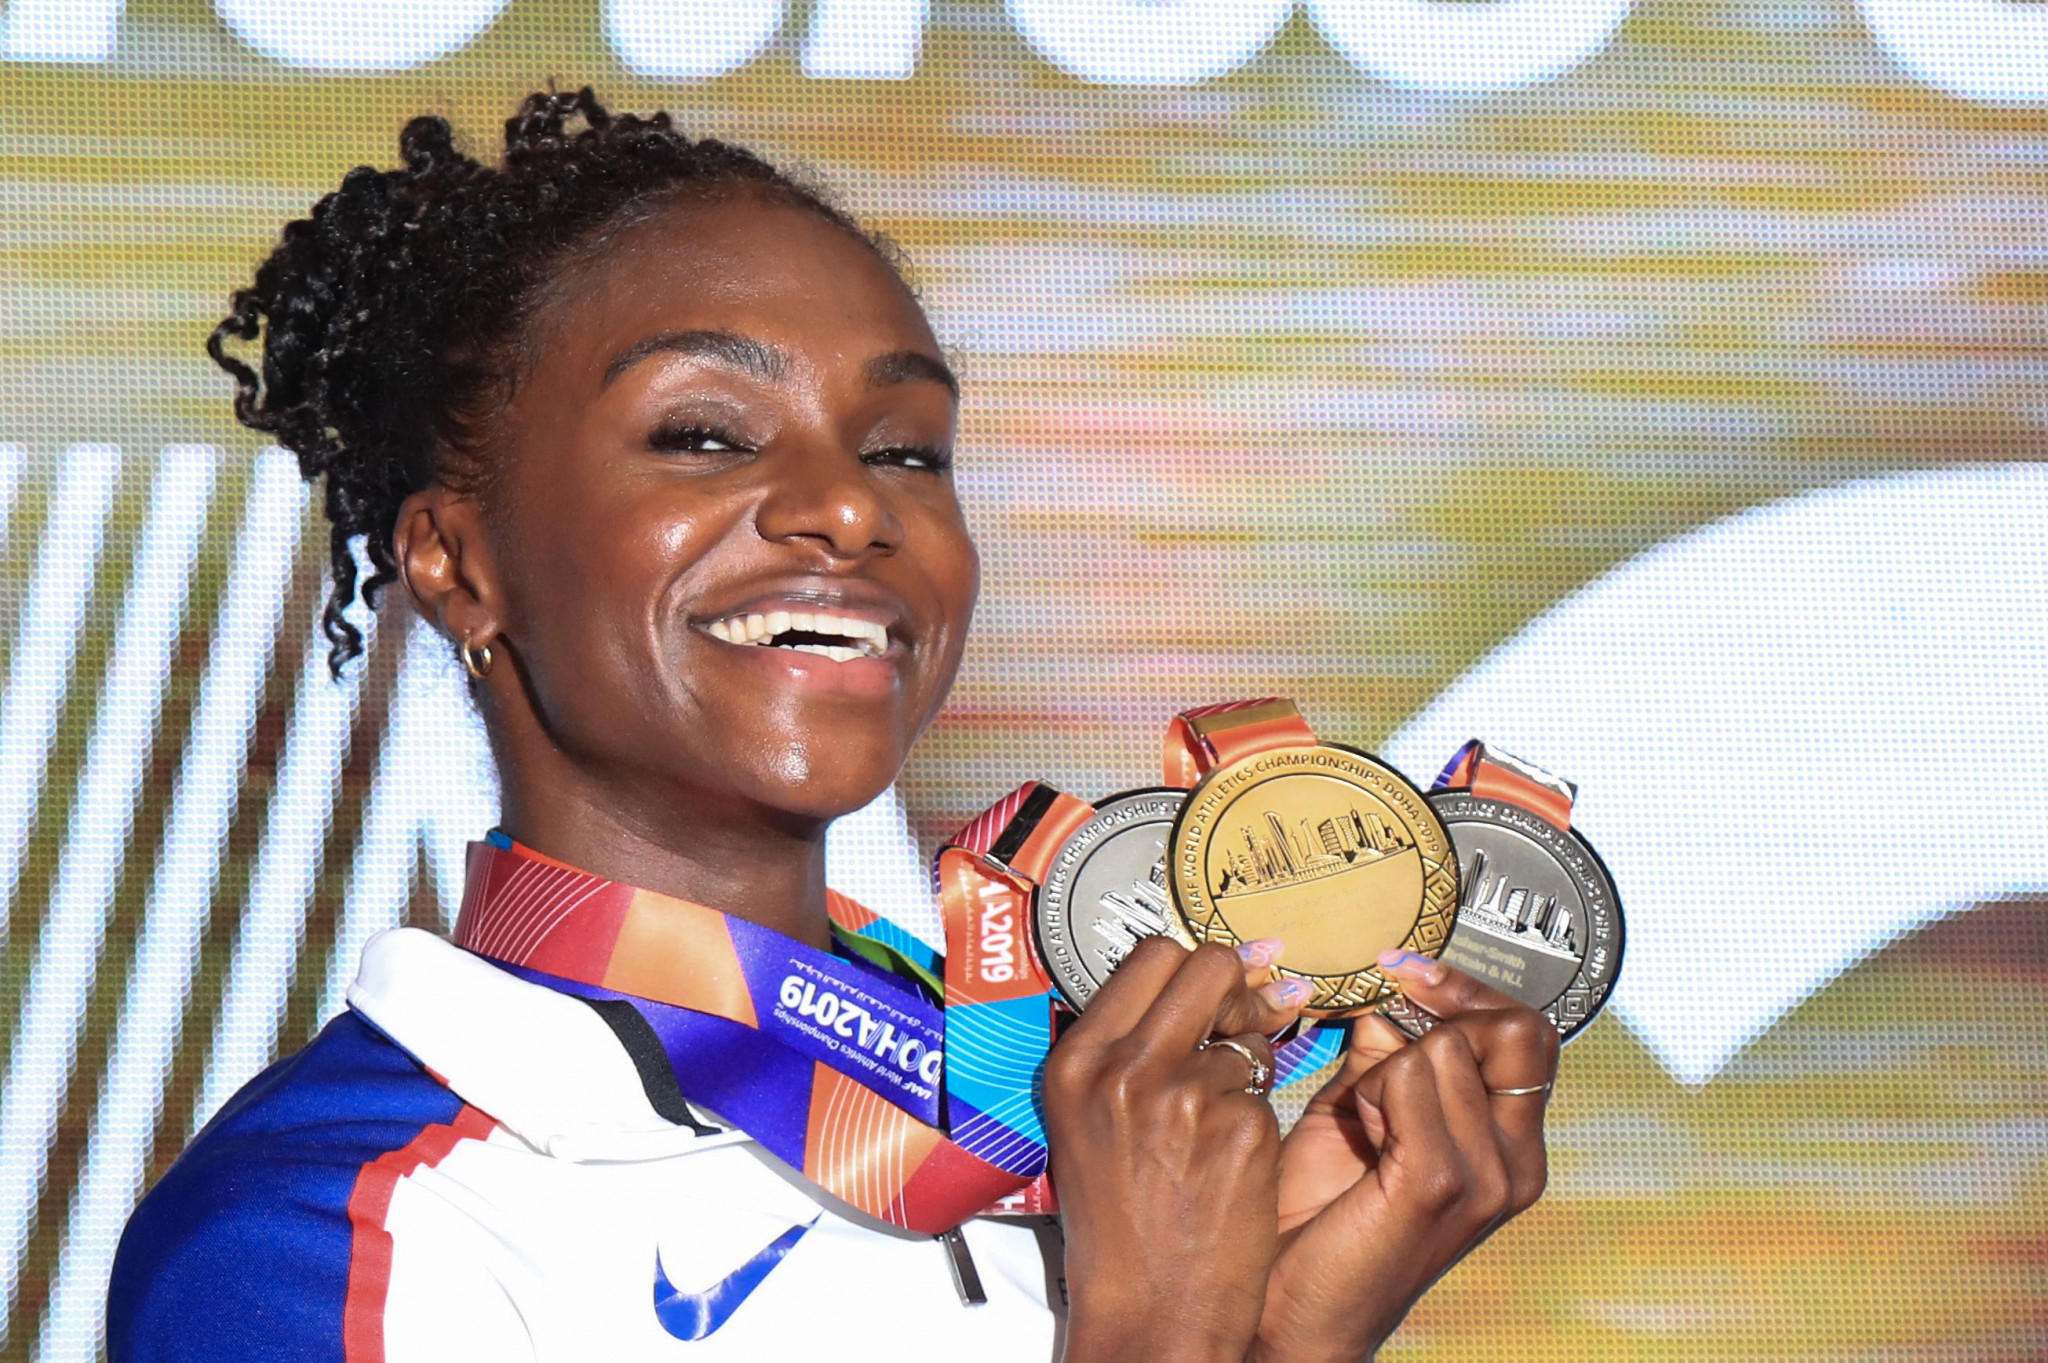 For personality and ability, Dina Asher-Smith was a more worthy winner of the Sports Personality crown ©Getty Images